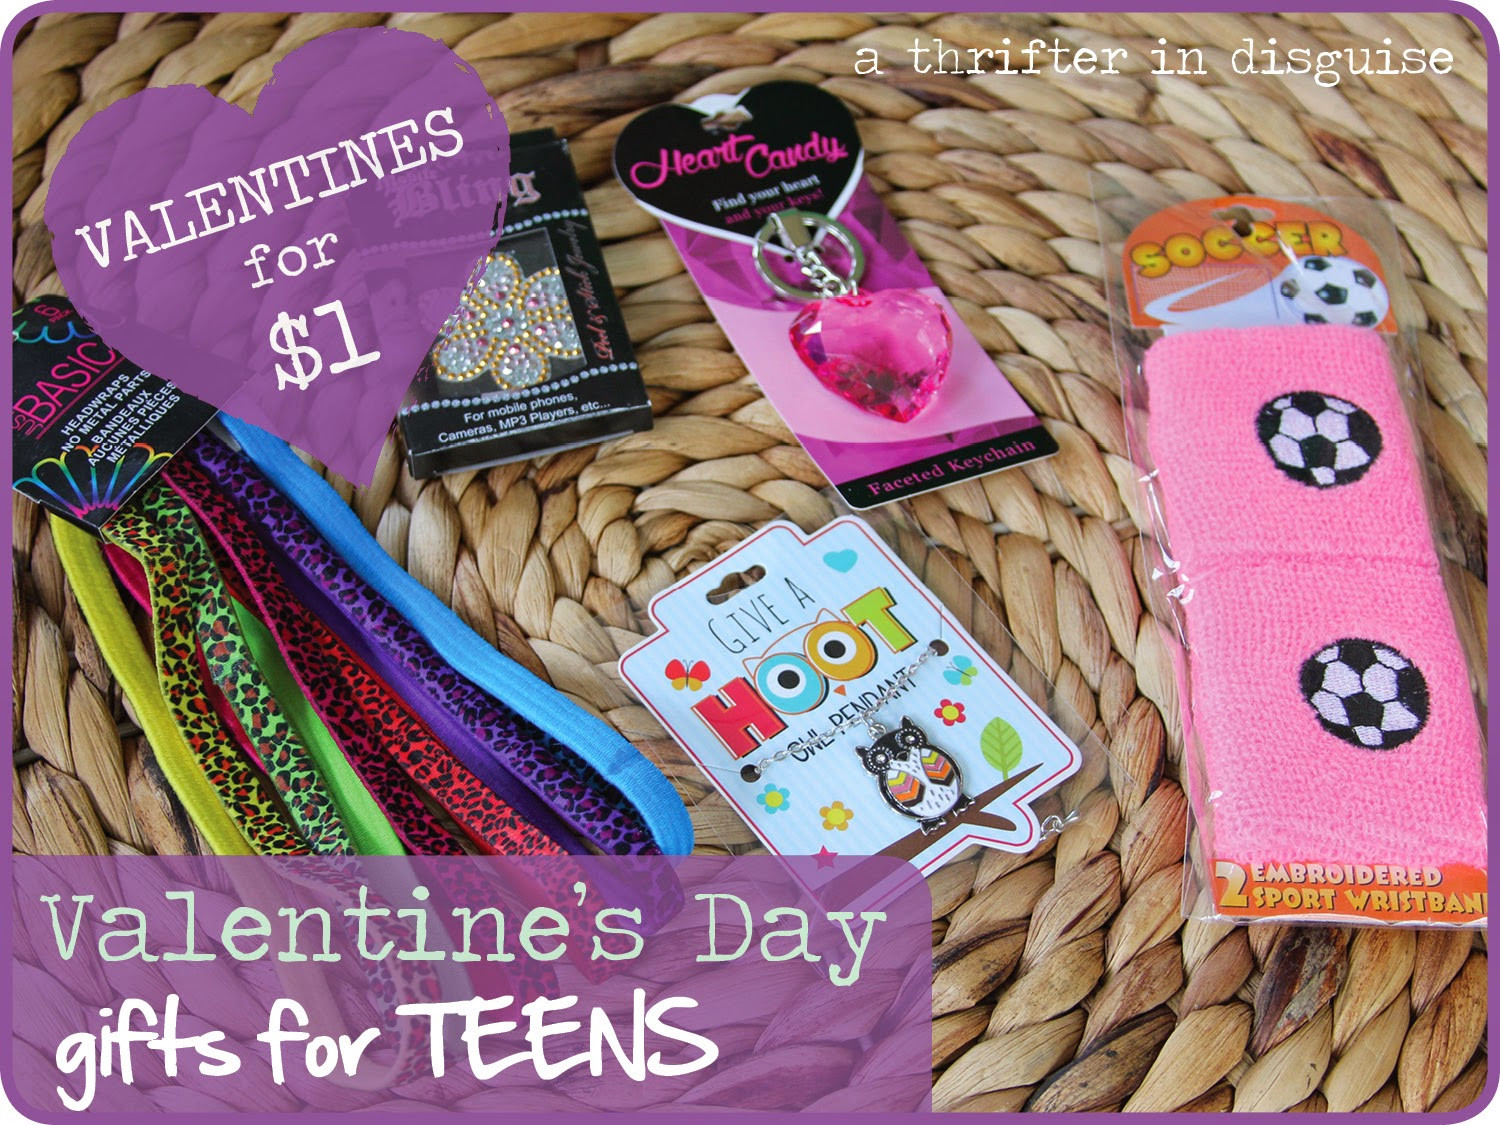 Valentine'S Day Gift Ideas For Teenage Daughter
 A Thrifter in Disguise More $1 Valentine s Day Gifts